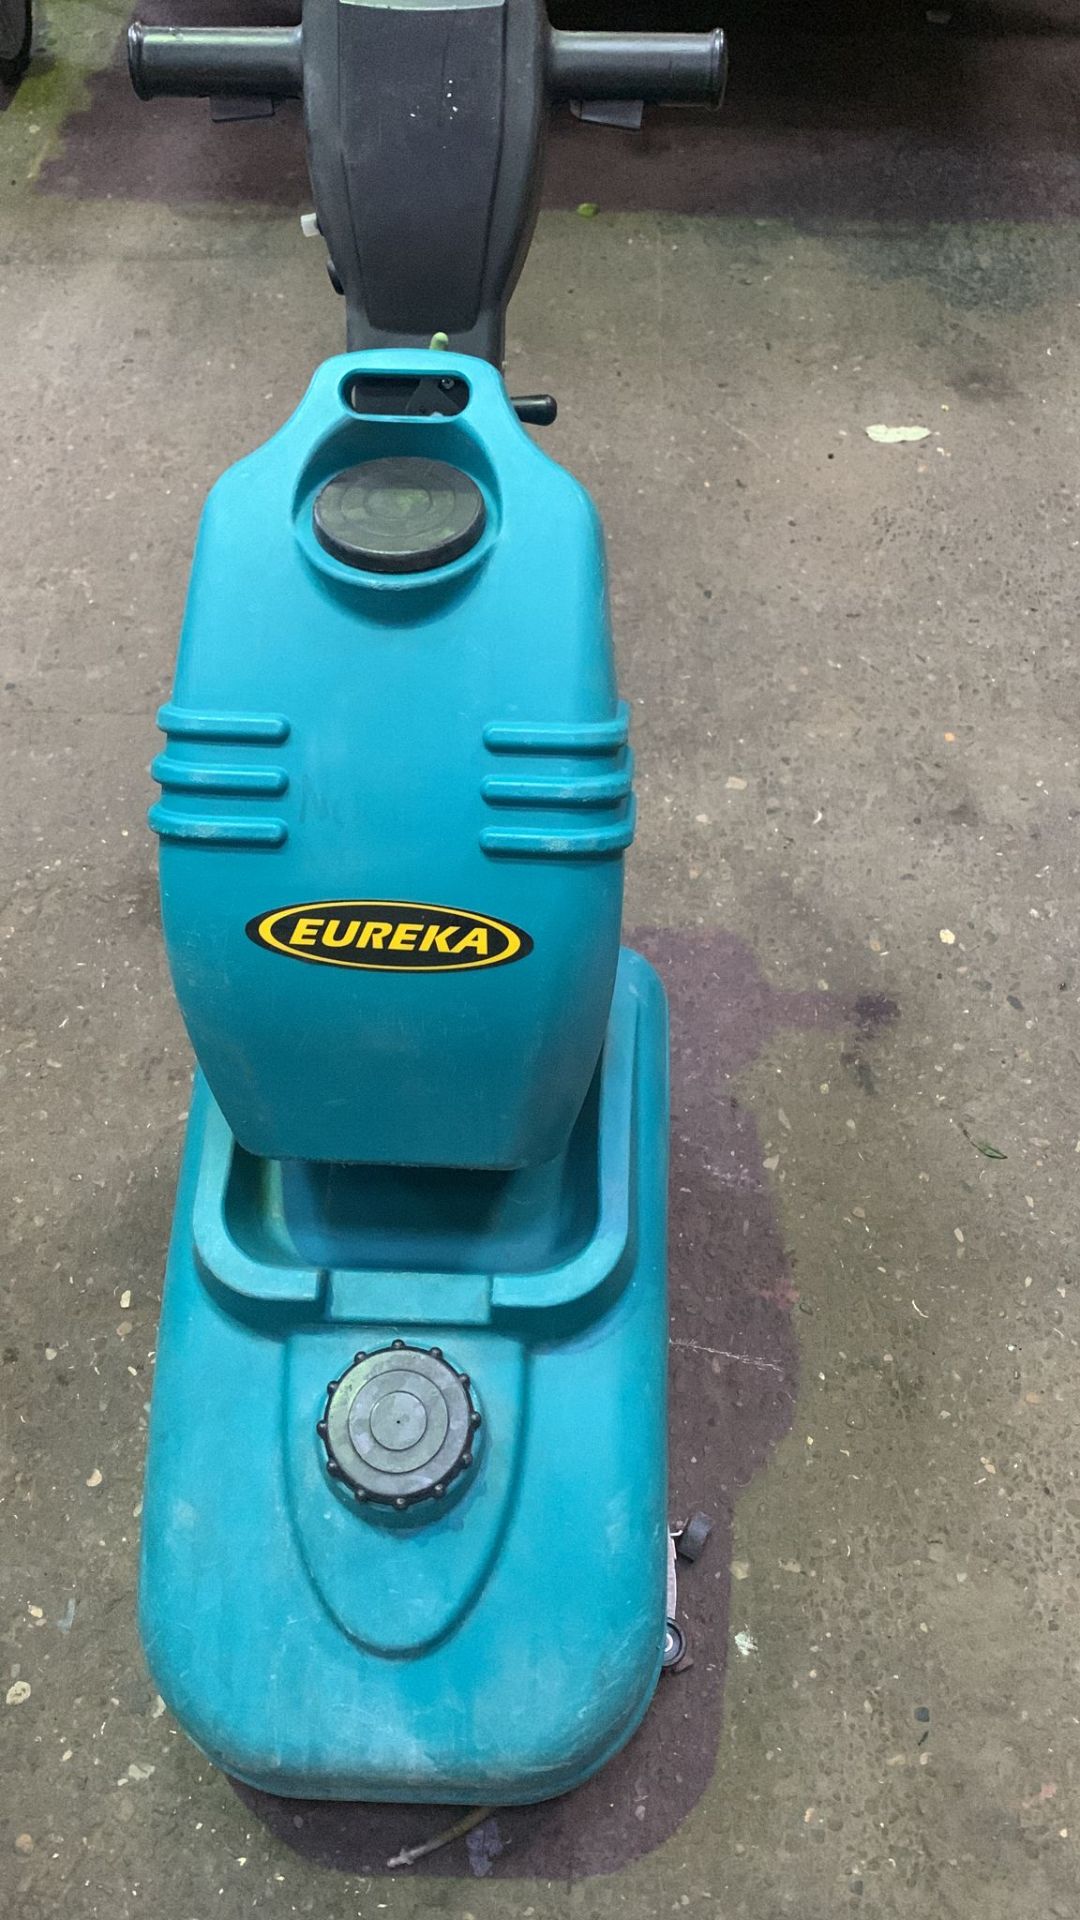 EUREKA E36 BATTERY SCRUBBER DRIER FLOOR CLEANING MACHINE SPARES AND REPAIRS SOME PARTS MISSING - Image 2 of 3